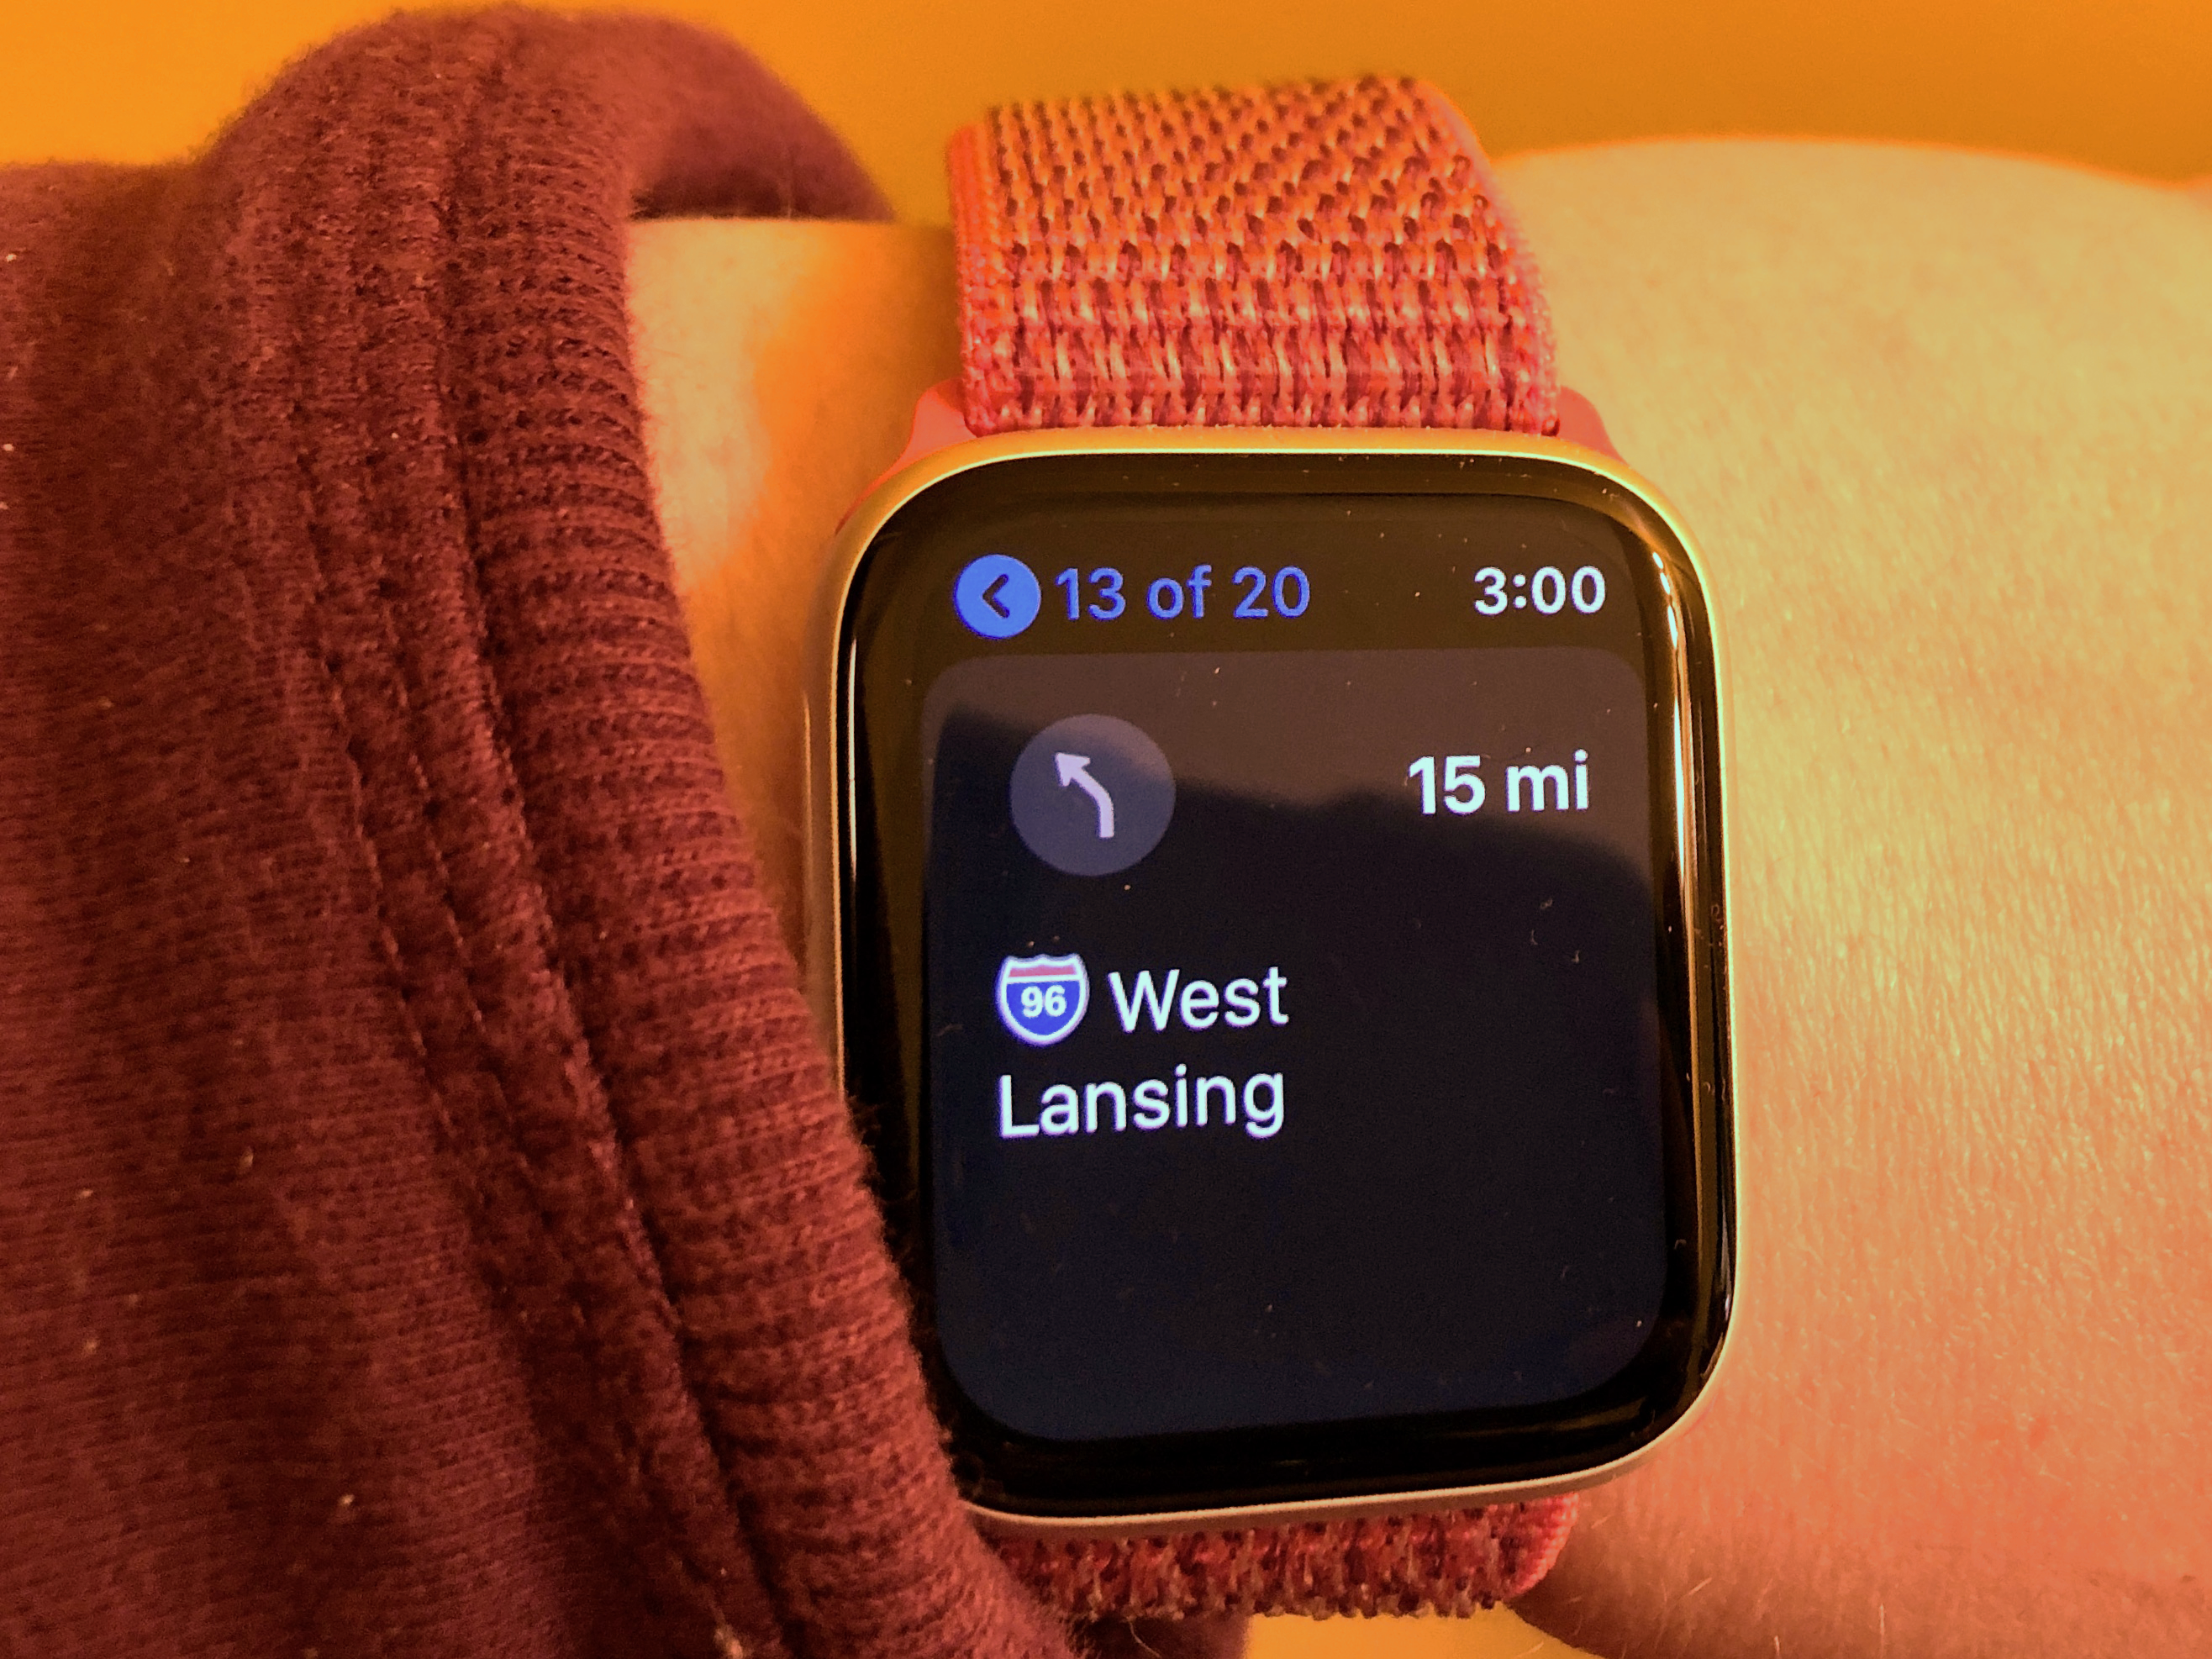 A person's wrist wearing an Apple Watch.  The watch shows turn by turn directions via the Apple Maps app.